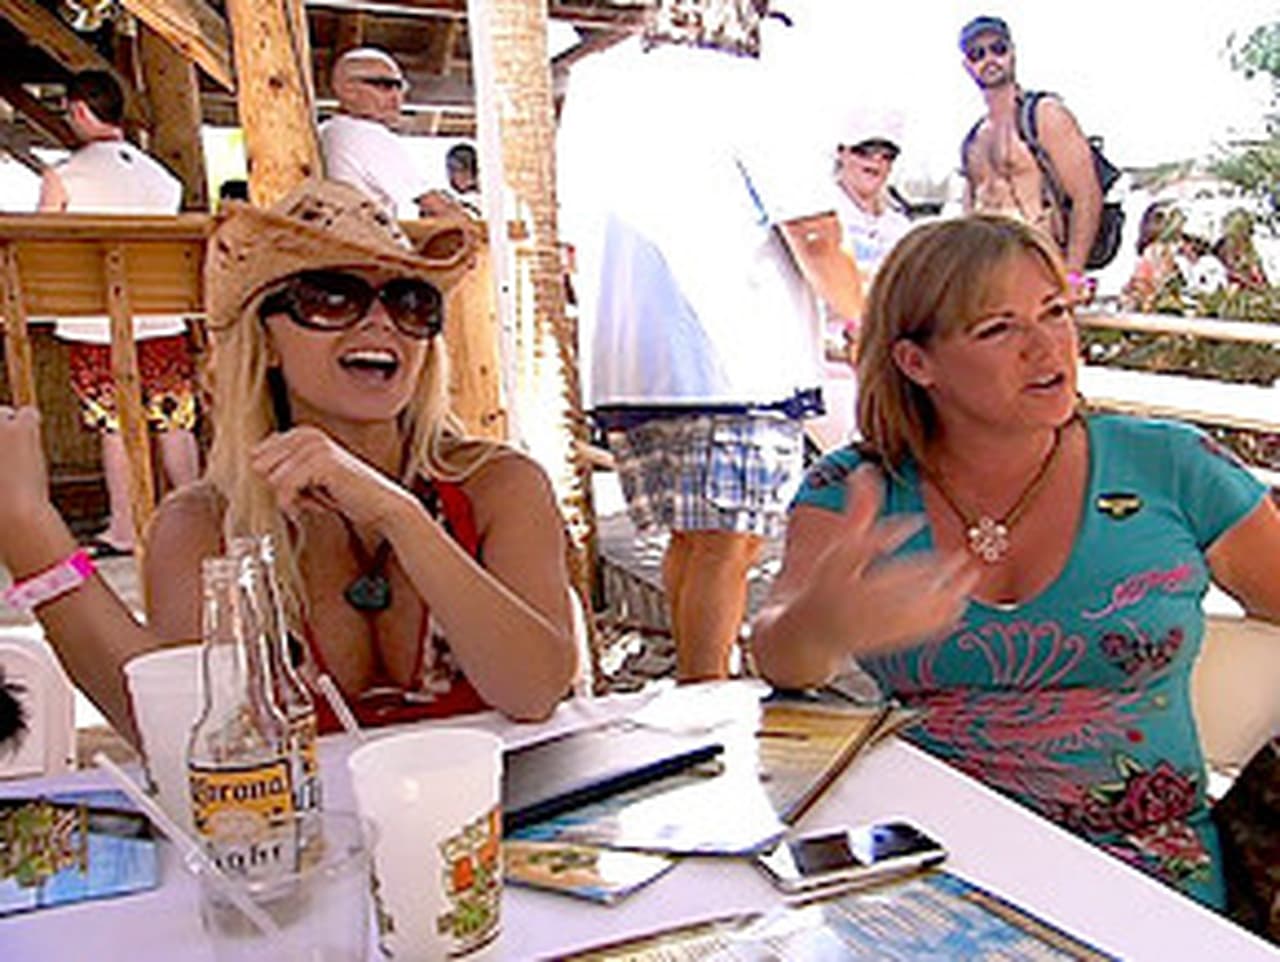 The Real Housewives of Orange County - Season 4 Episode 5 : 120 In The Shade